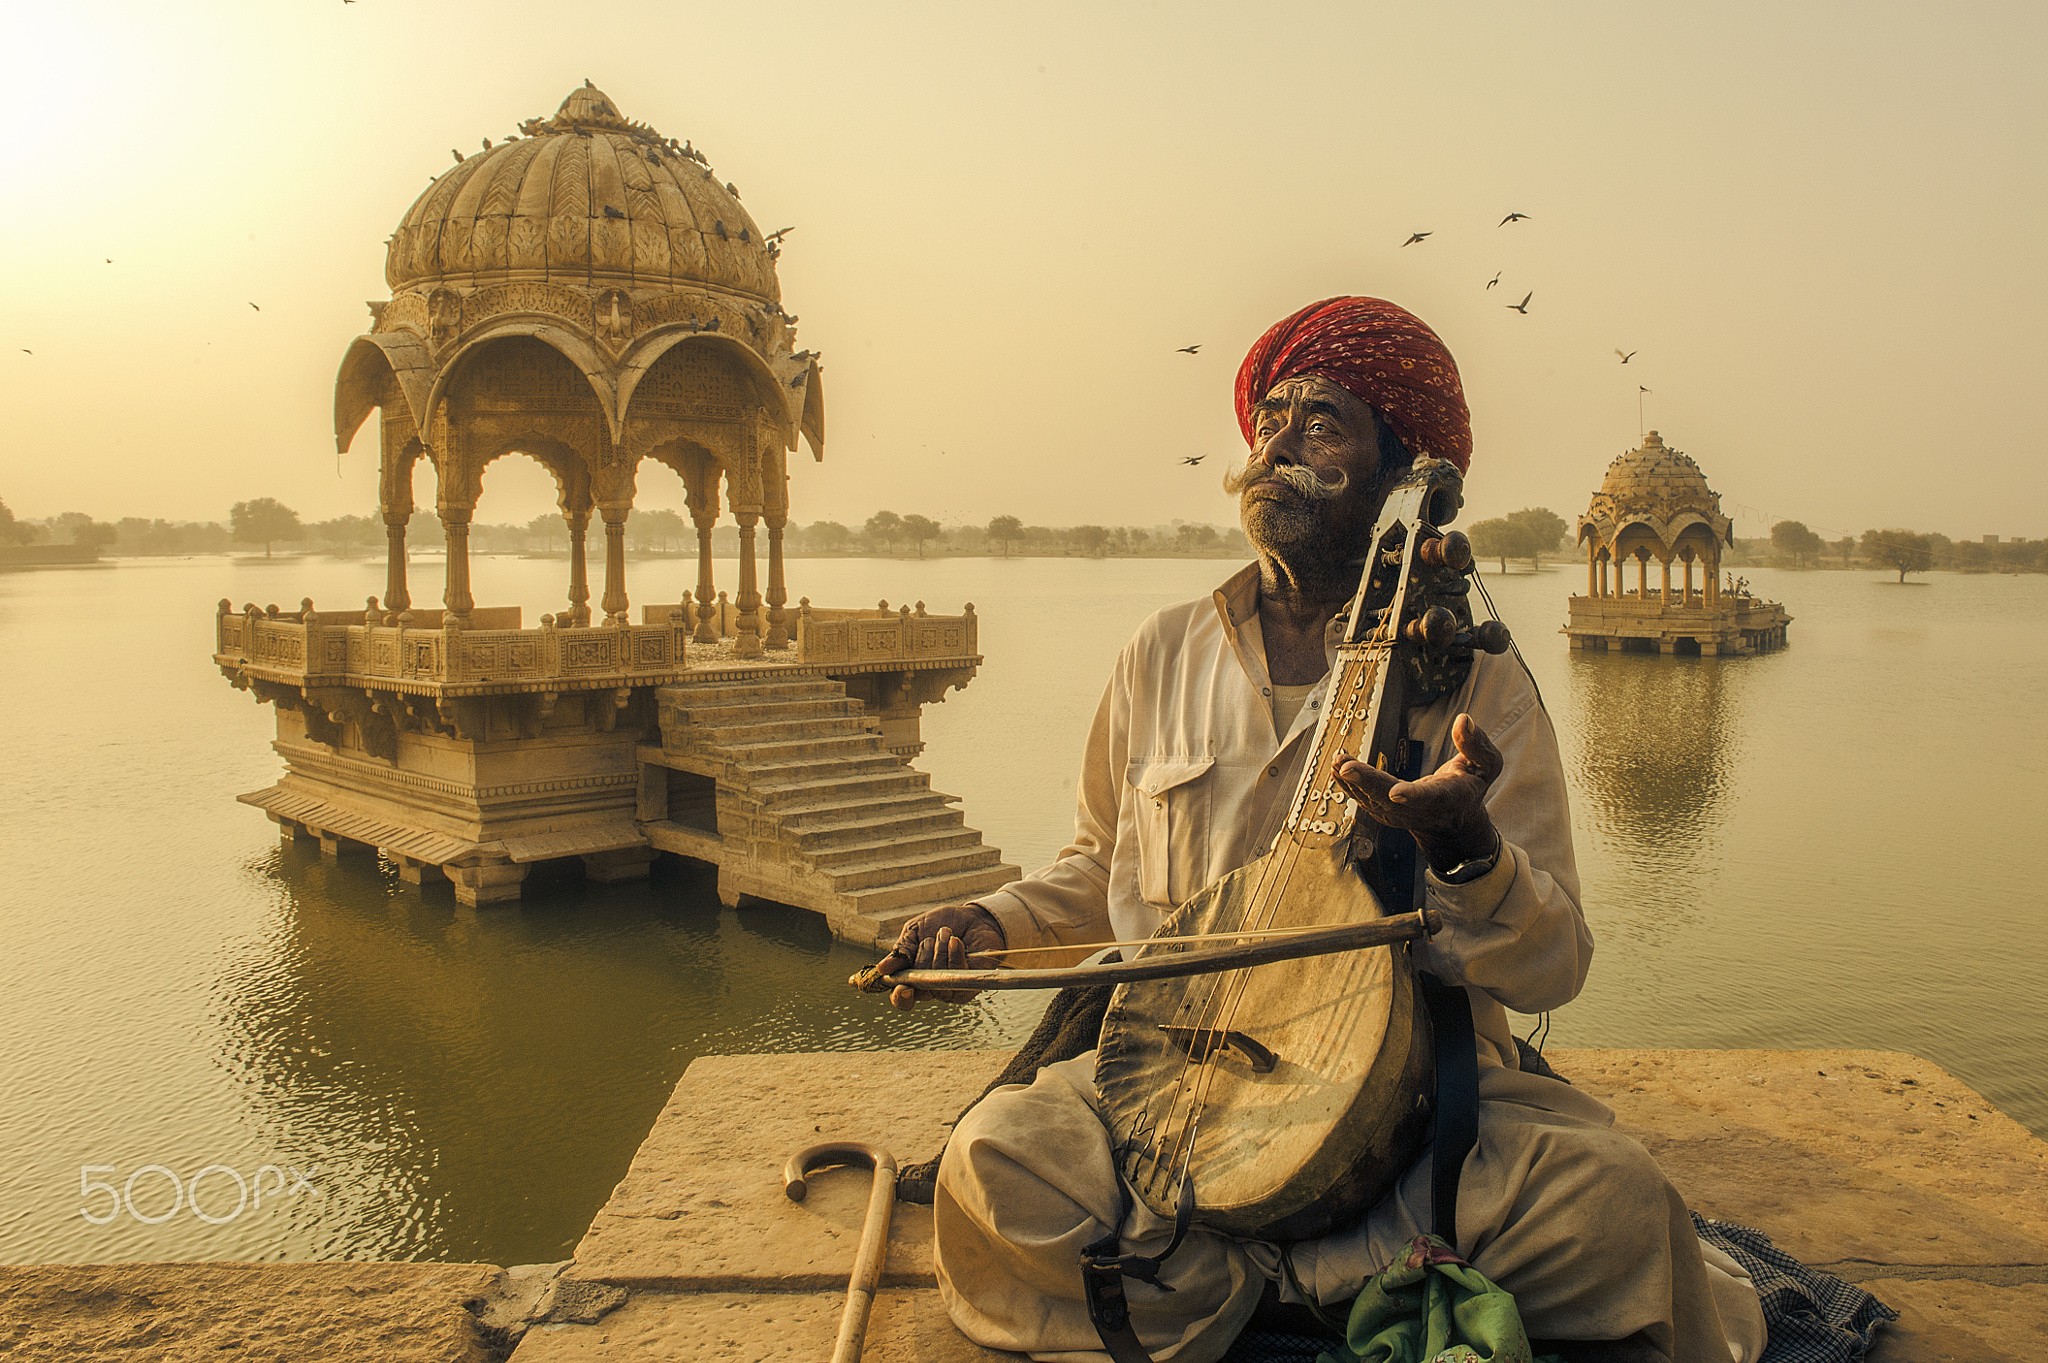 General 2048x1363 men India musical instrument old people stringed instruments 6 string architecture river birds